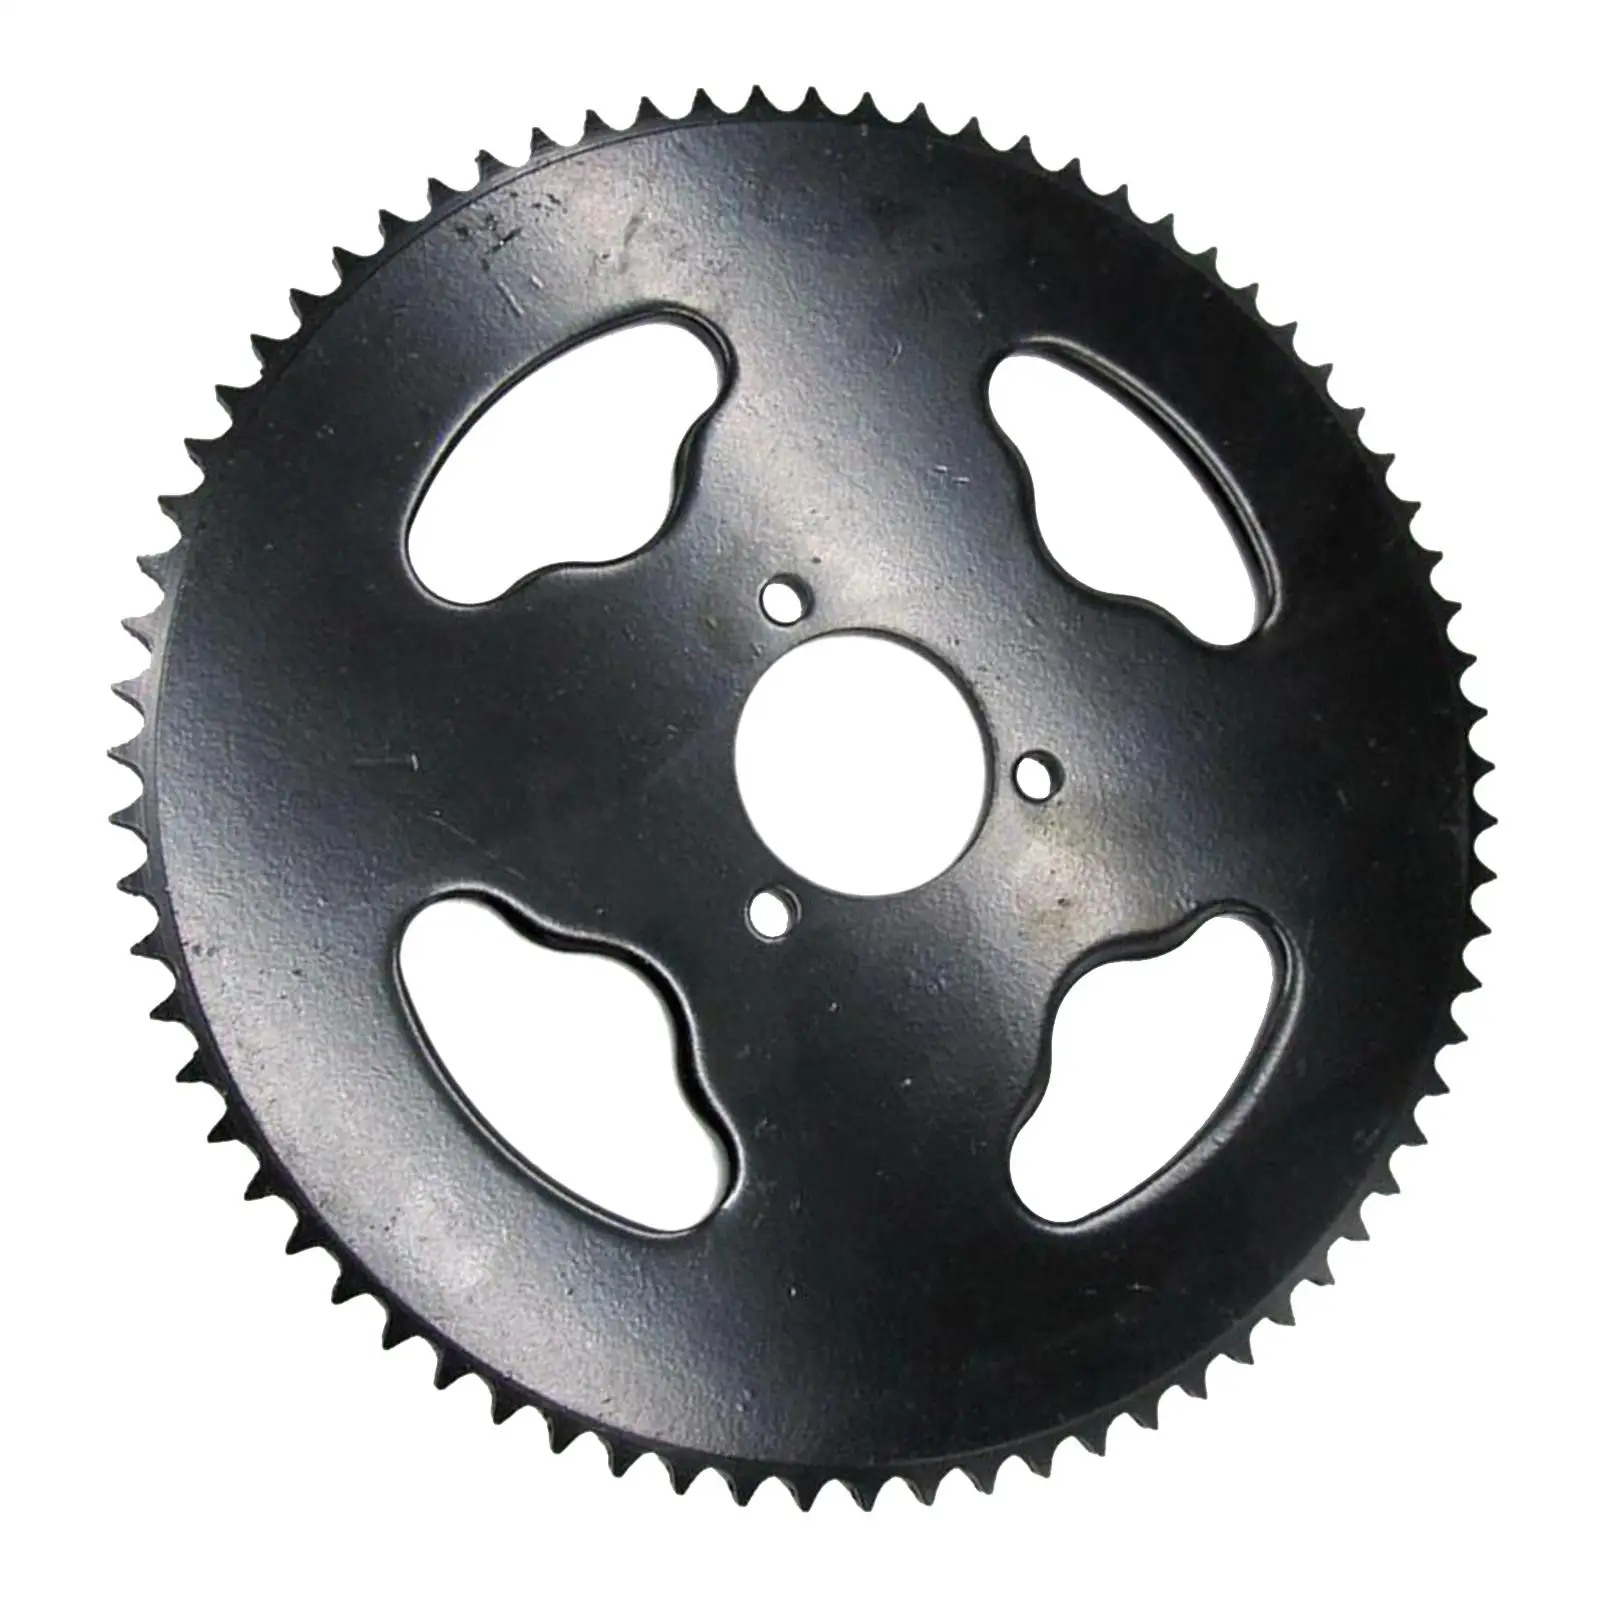 Durable 74T 35mm Chain Sprocket for 47cc 49cc Mini Moto Pocket Bike Scooter